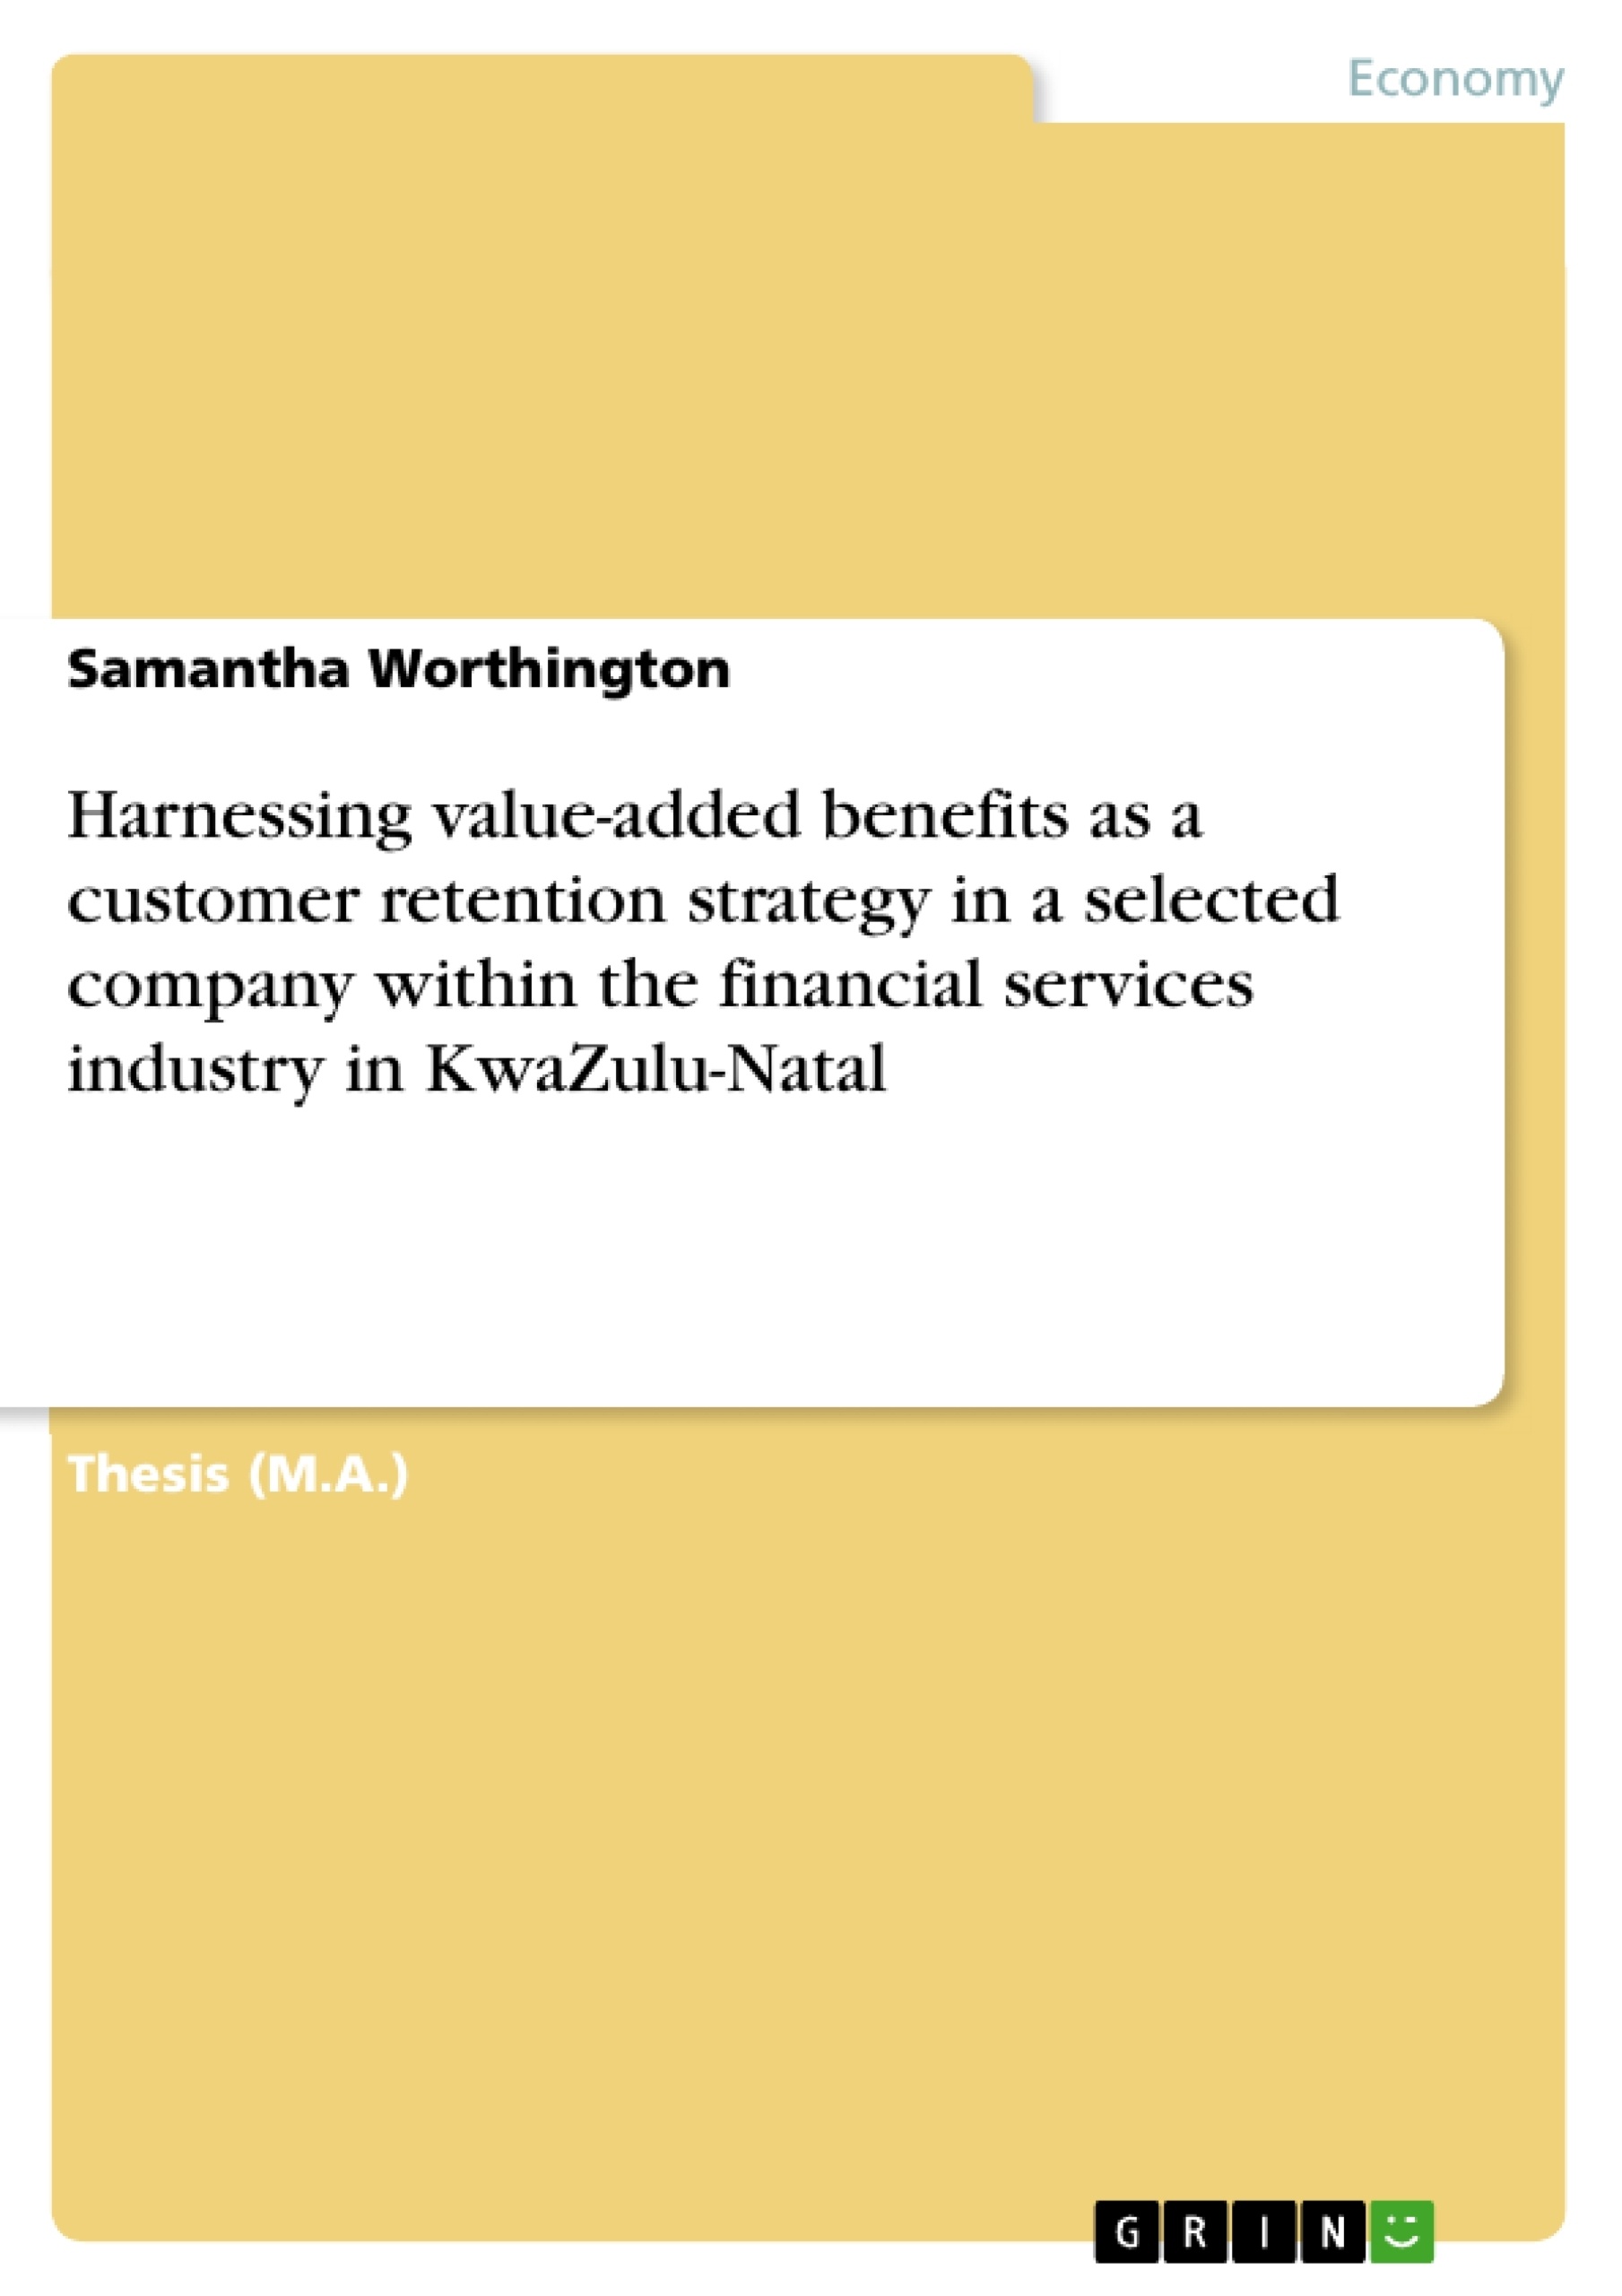 Título: Harnessing value-added benefits as a customer retention strategy in a selected company within the financial services industry in KwaZulu-Natal